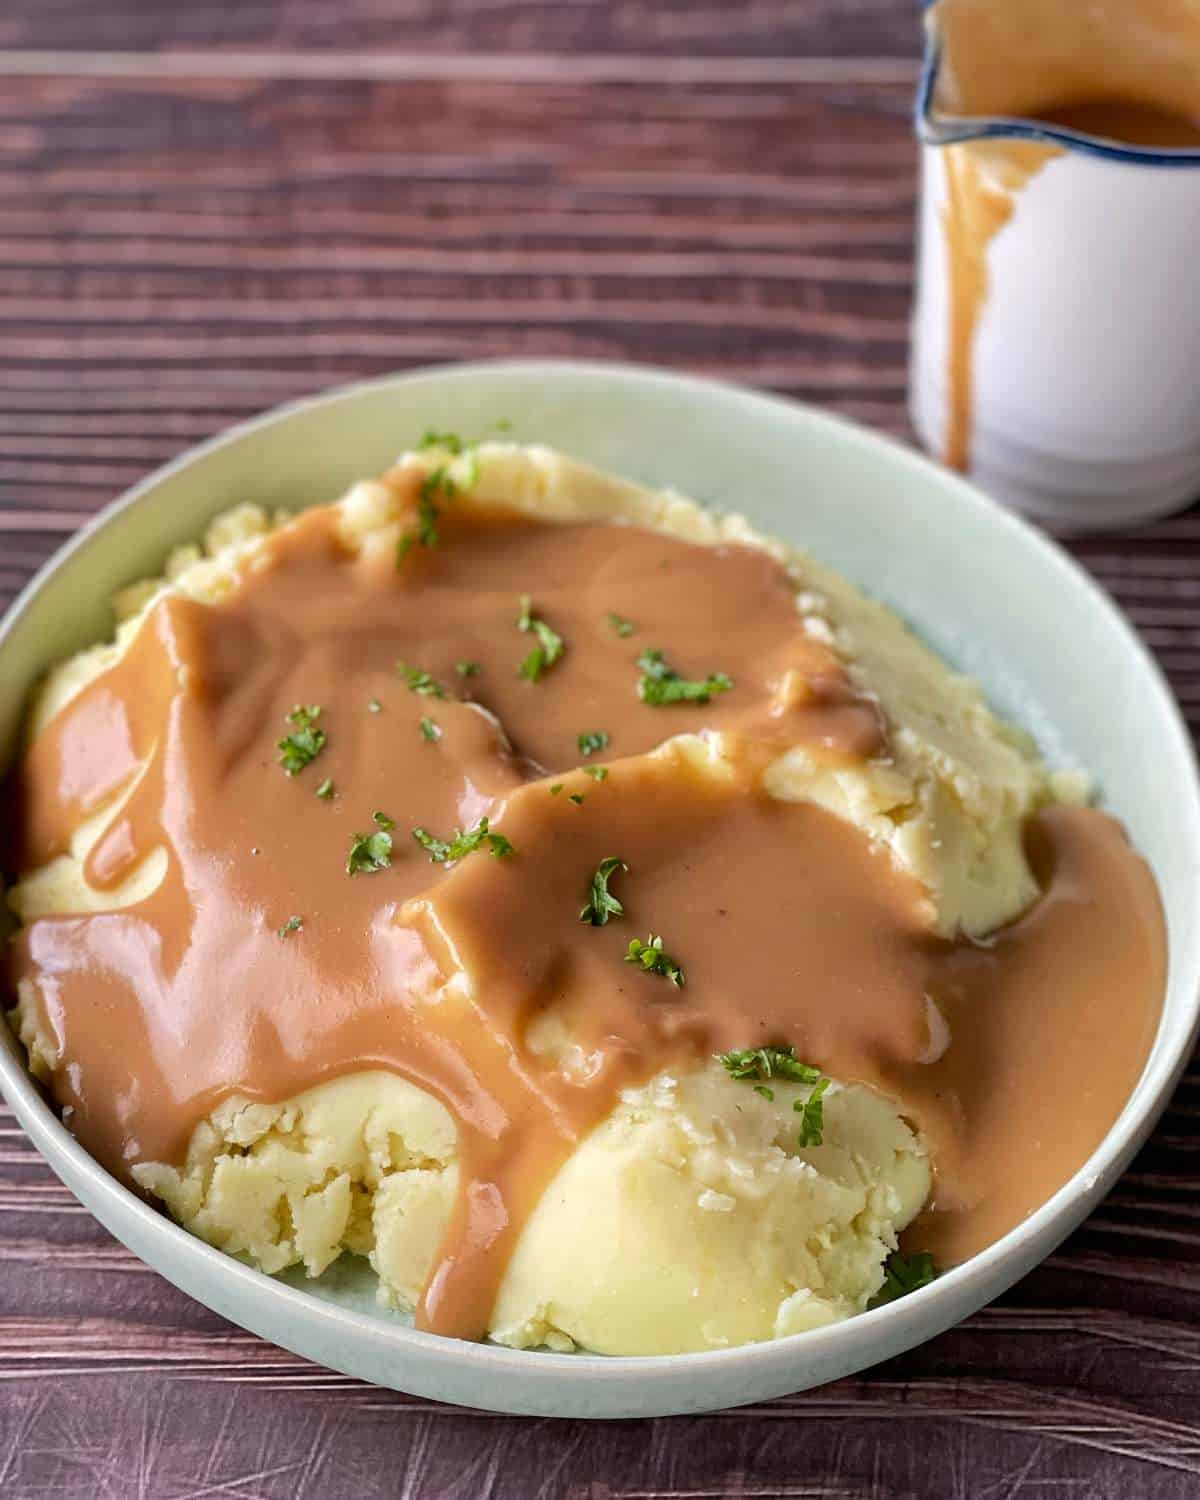 Potato and Gravy served in a white serving bowl with a few sprinkles of parsley on top.